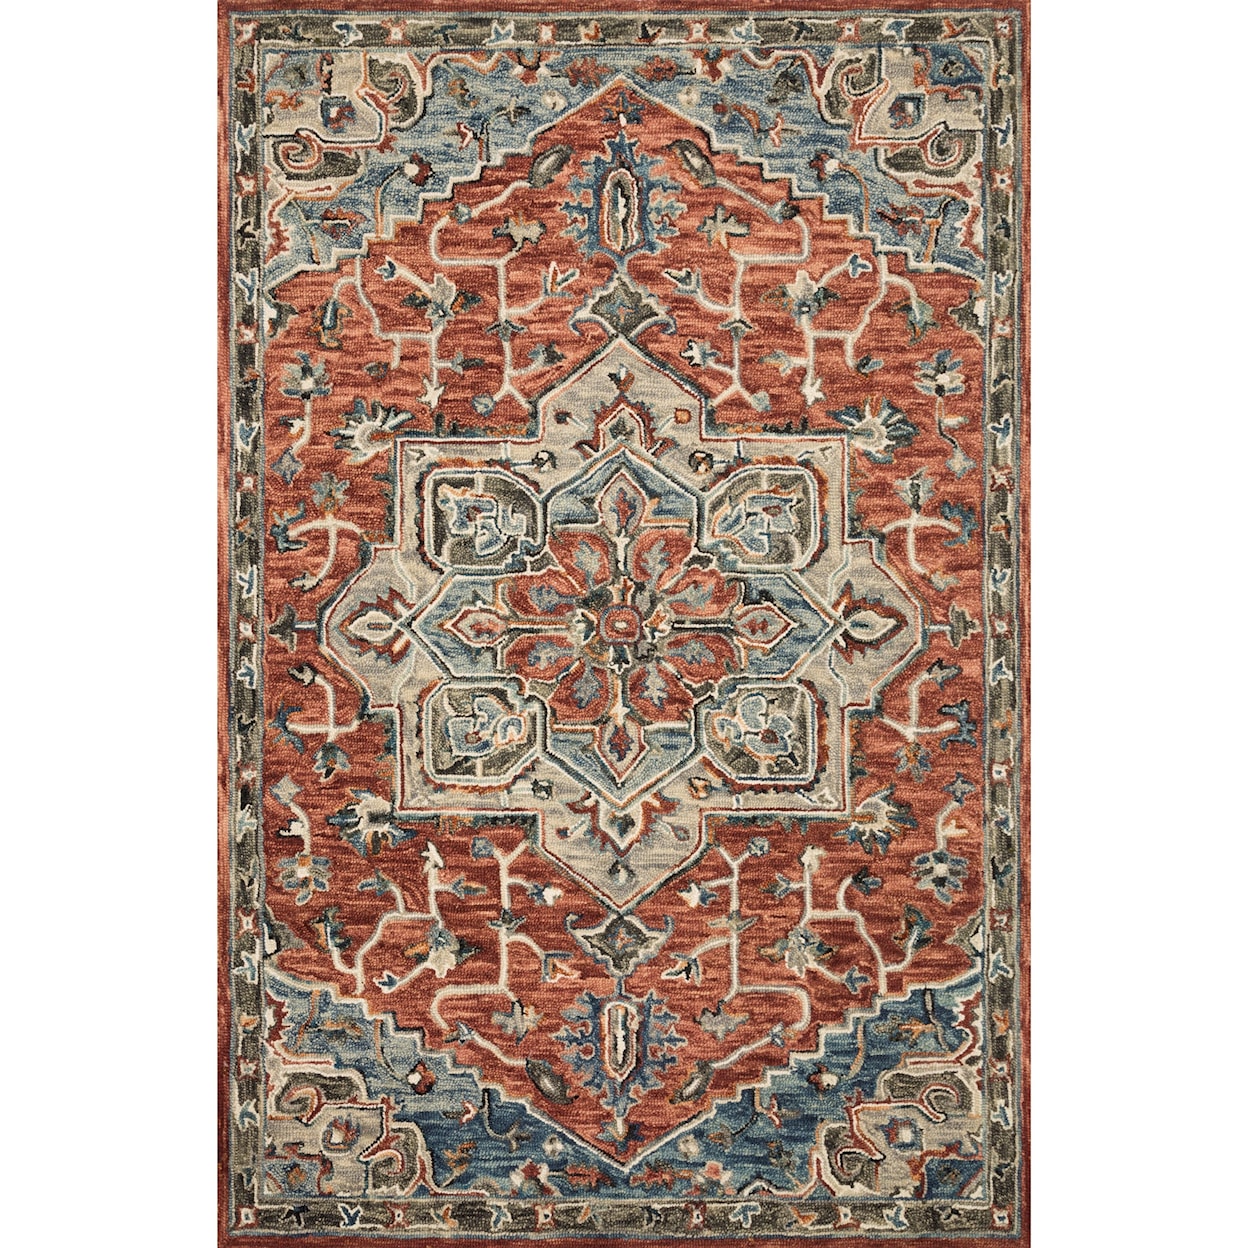 Reeds Rugs Victoria 7'9" x 9'9" Red / Multi Rug